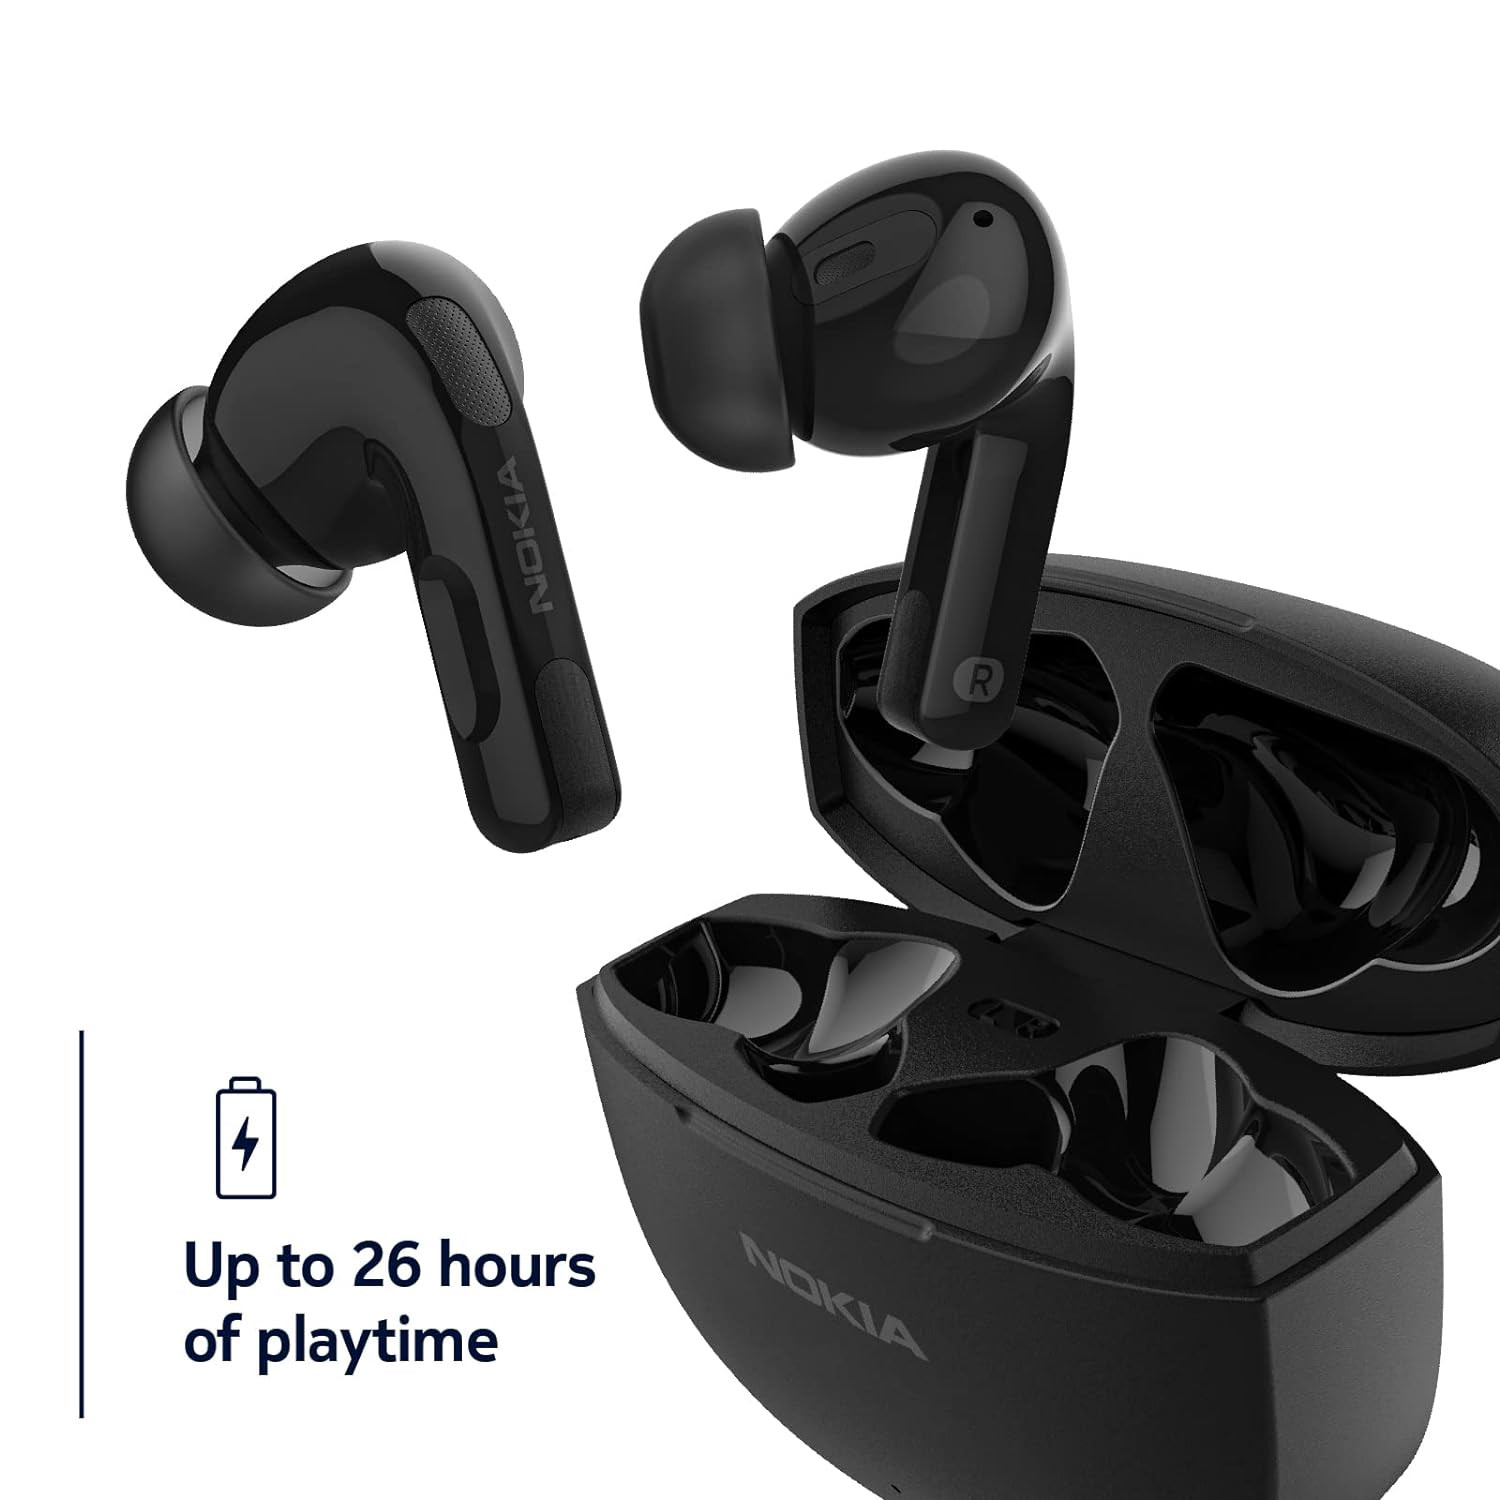 Nokia Go Earbuds+ True Wireless Earbuds TWS-201 (Black) - Portable Bluetooth 5.0 in-Ear Headphones with Touch Control - Comfortable Fit, Voice Assistant-Enabled, 26 Hours Use with Charging Case